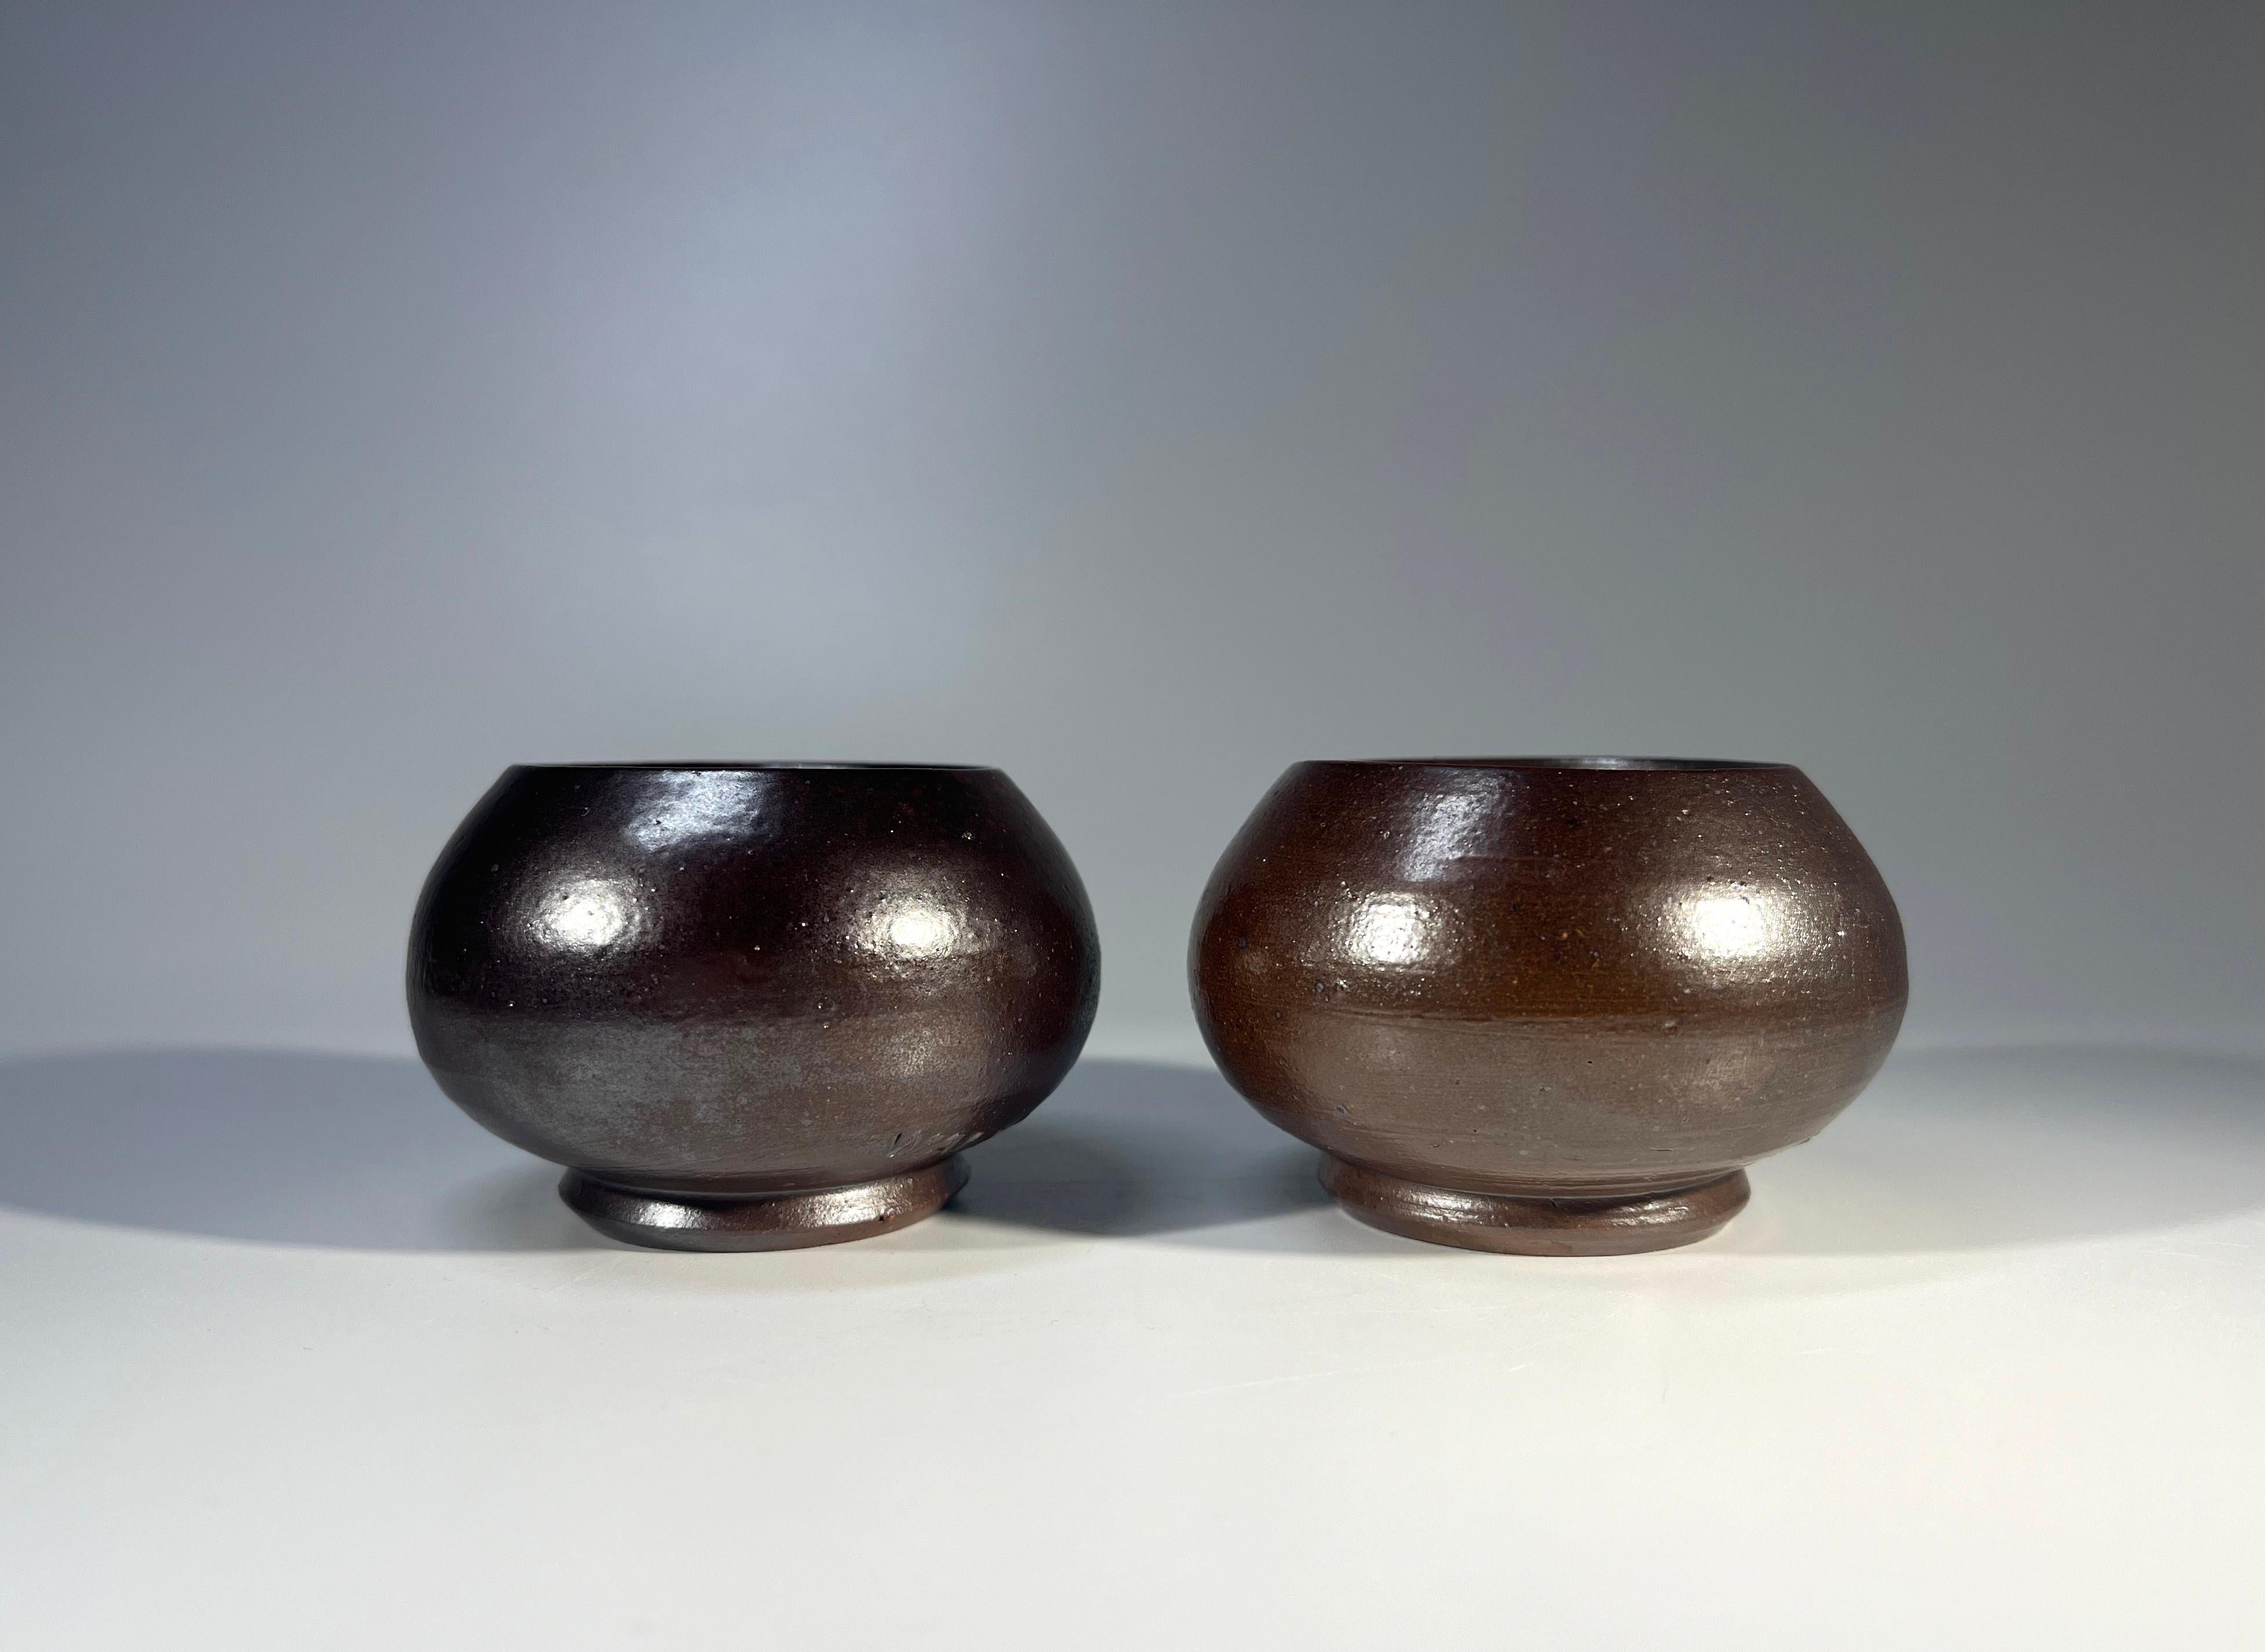 A fine pair of stoneware tea light holders by Arthur Andersson for Wallåkra of Sweden
Simplified design with a potent dark brown glaze. Ageless.
Circa 1950's
Signed Wallåkra to base
Height 1.75 inch, Diameter 2.75 inch
In excellent condition. 
Wear